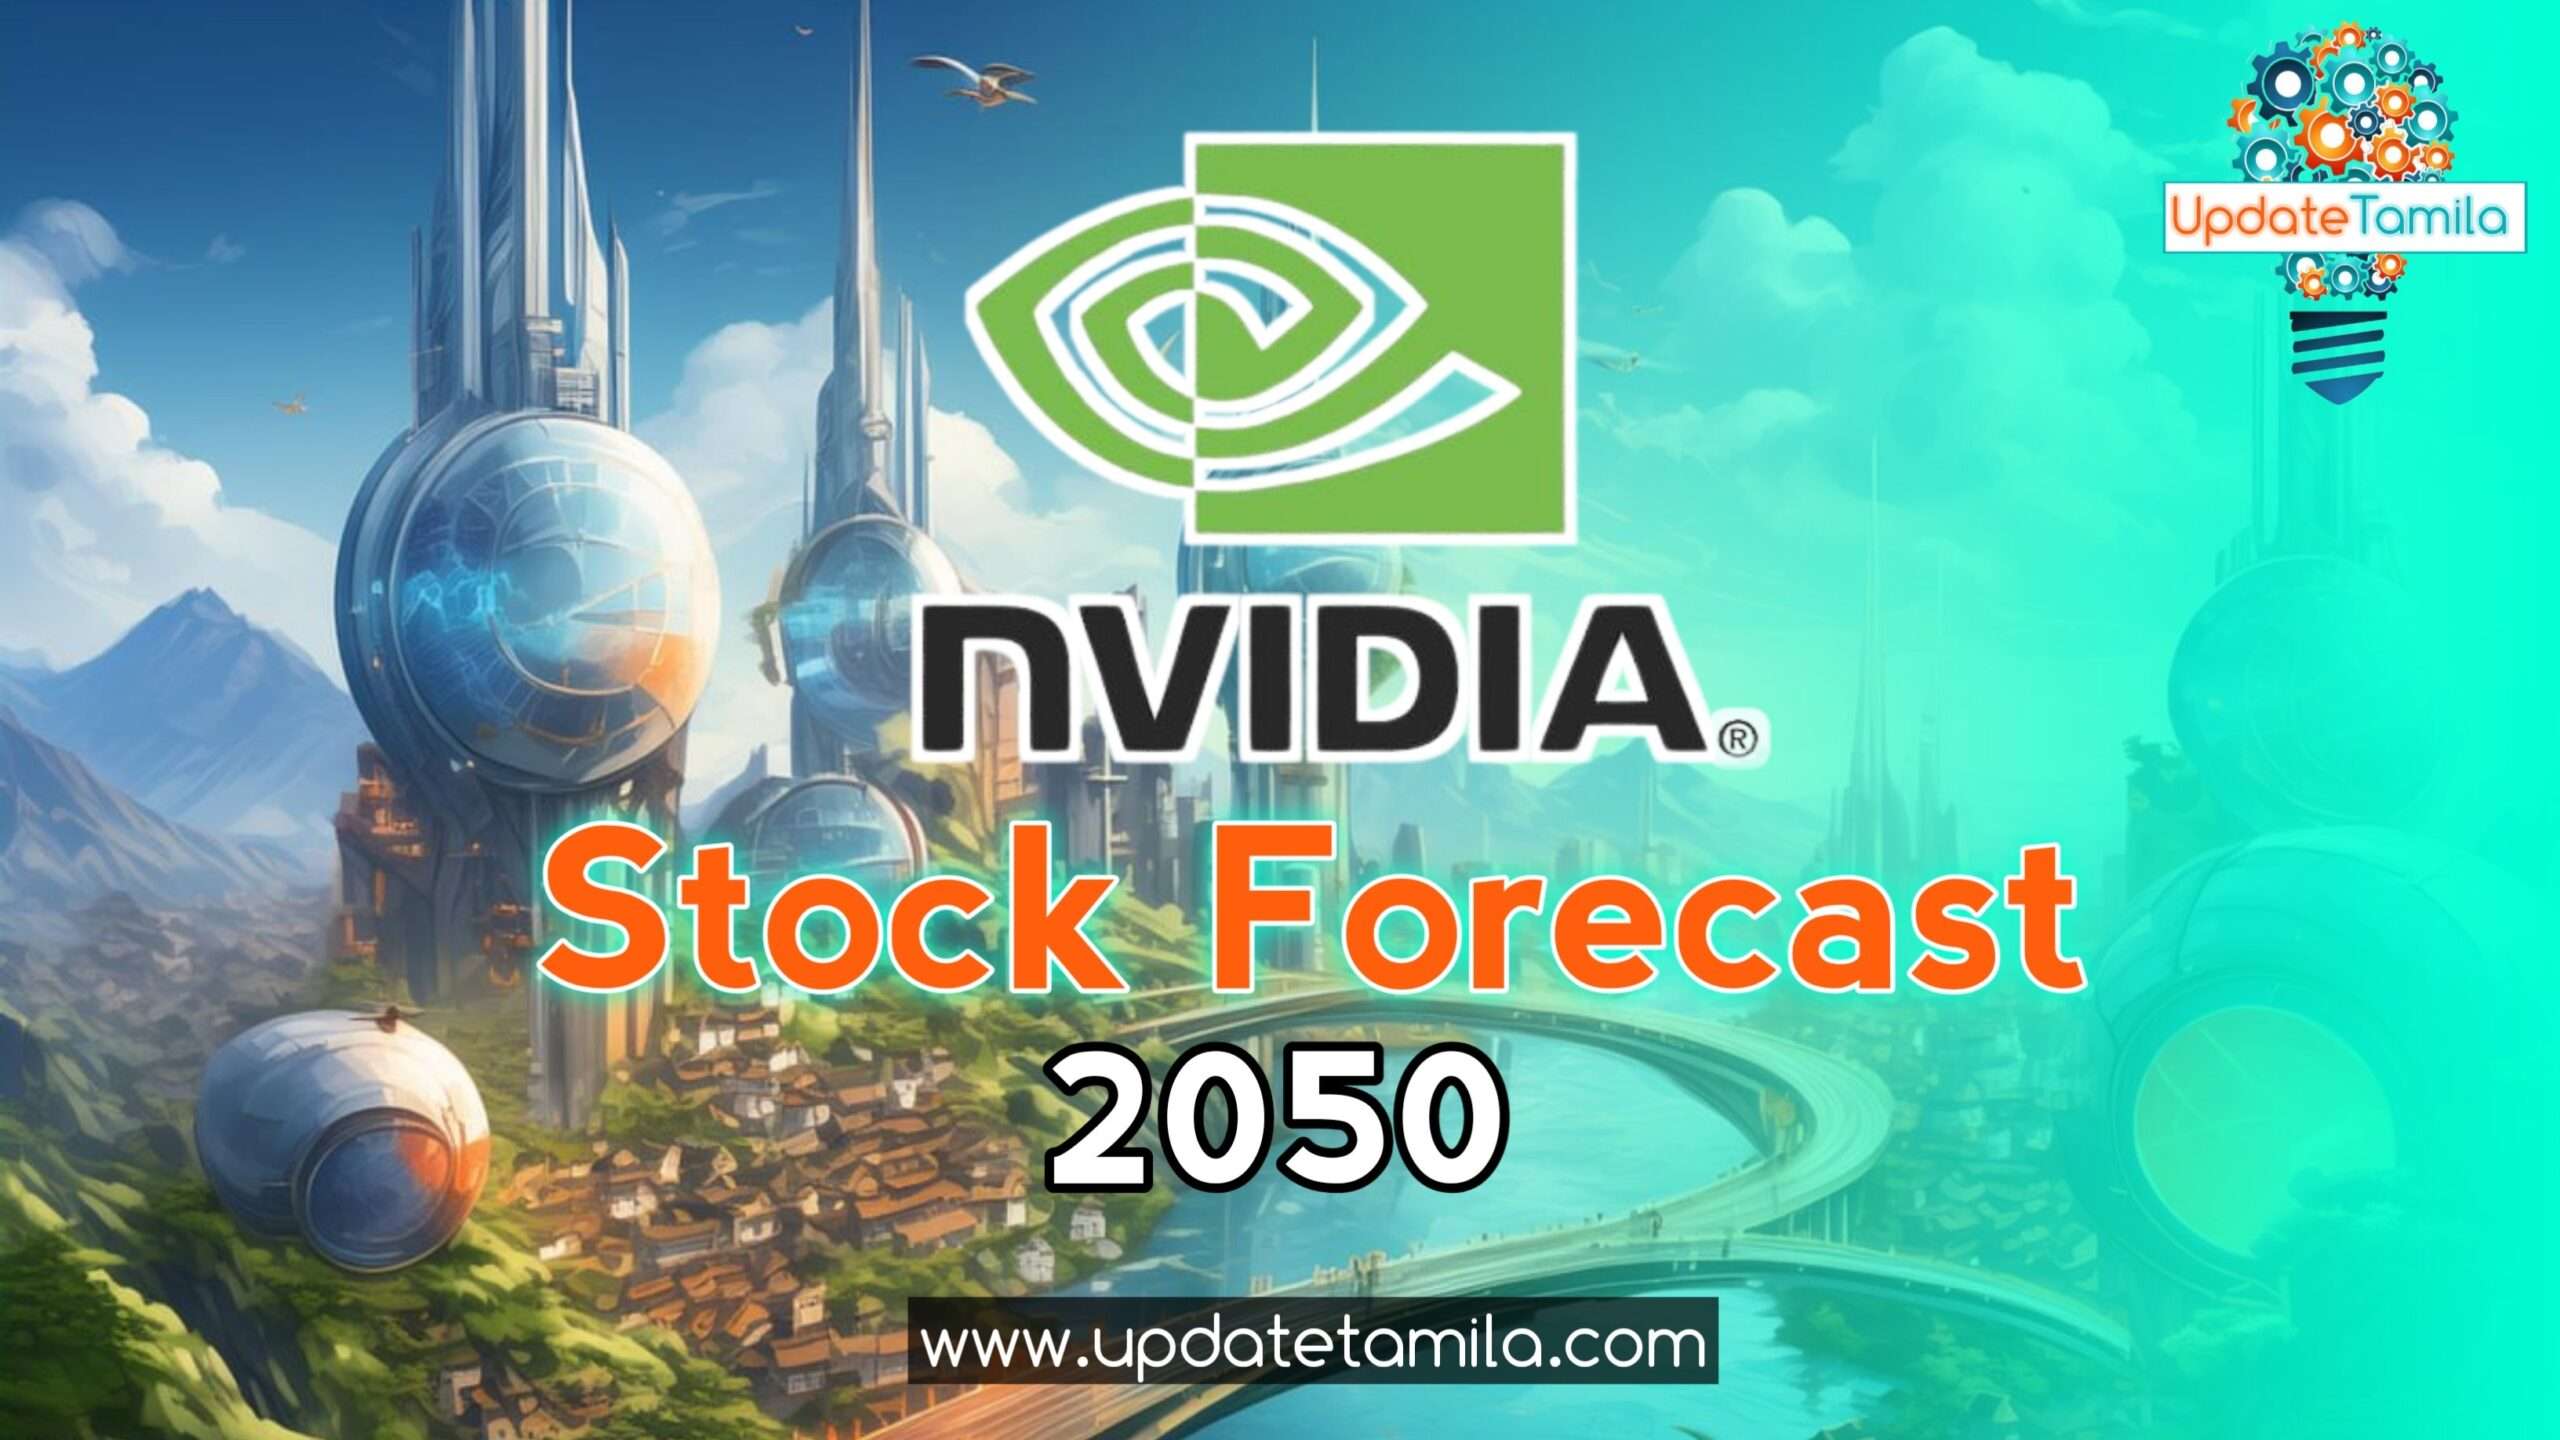 NVIDIA Stock Forecast 2050: Analyzing Long-Term Investment Opportunities